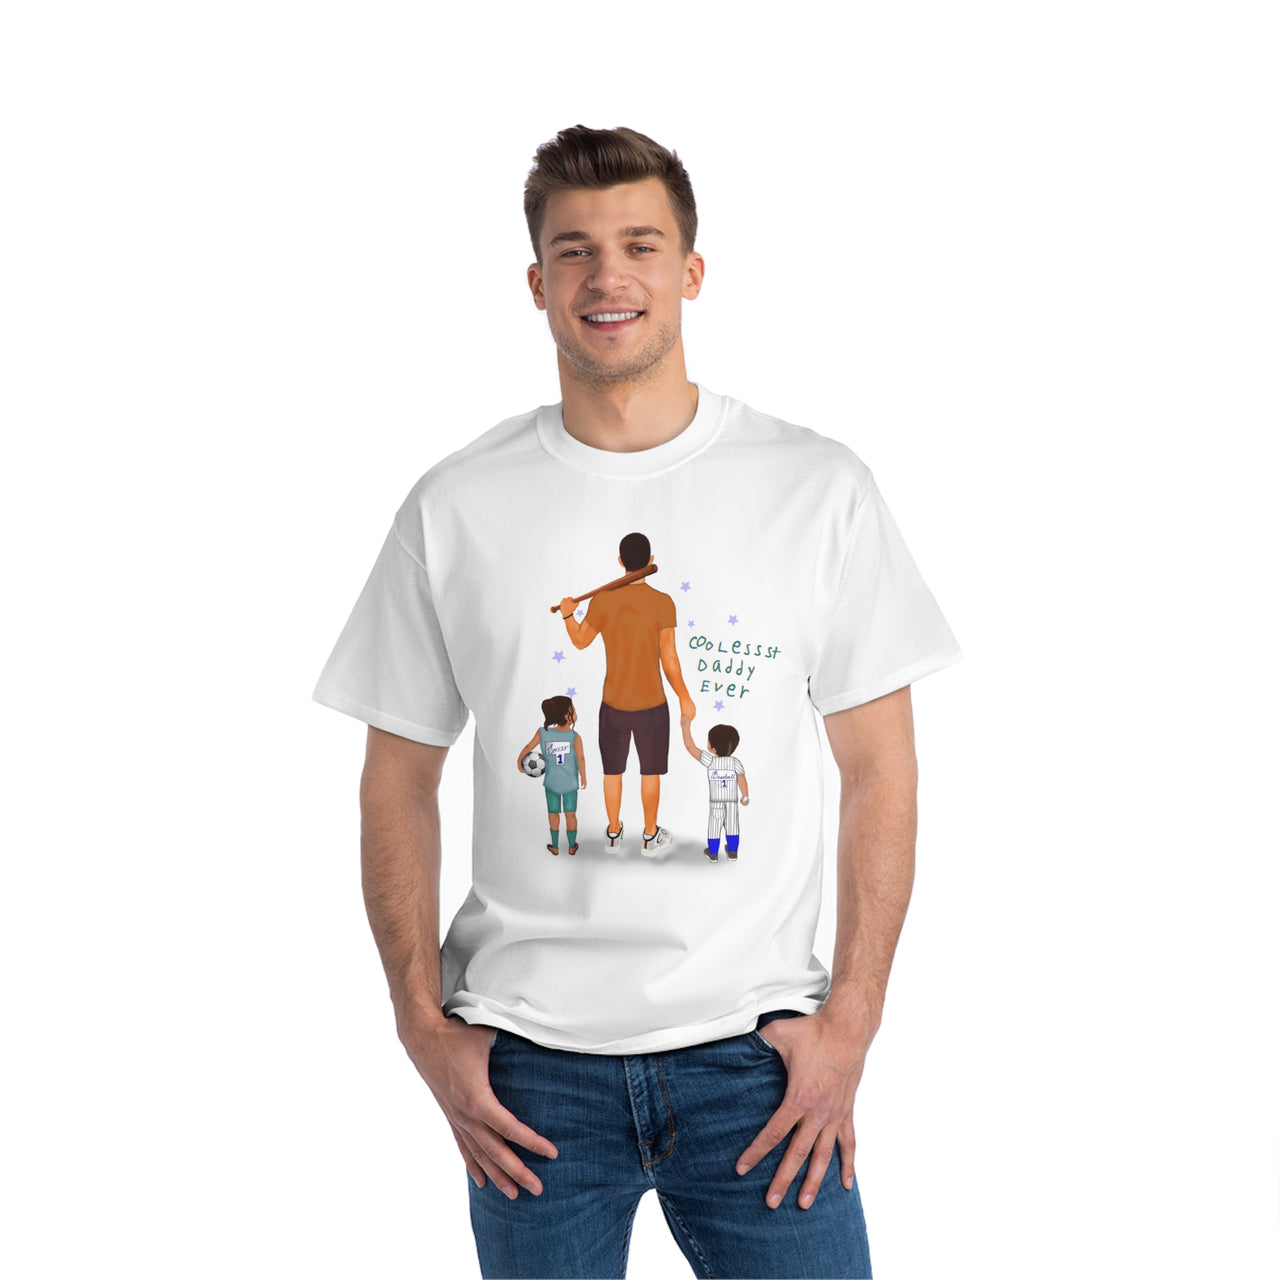 Coolest Daddy Ever T-Shirt - Dad Walking Daughter and Son to Sporting Events